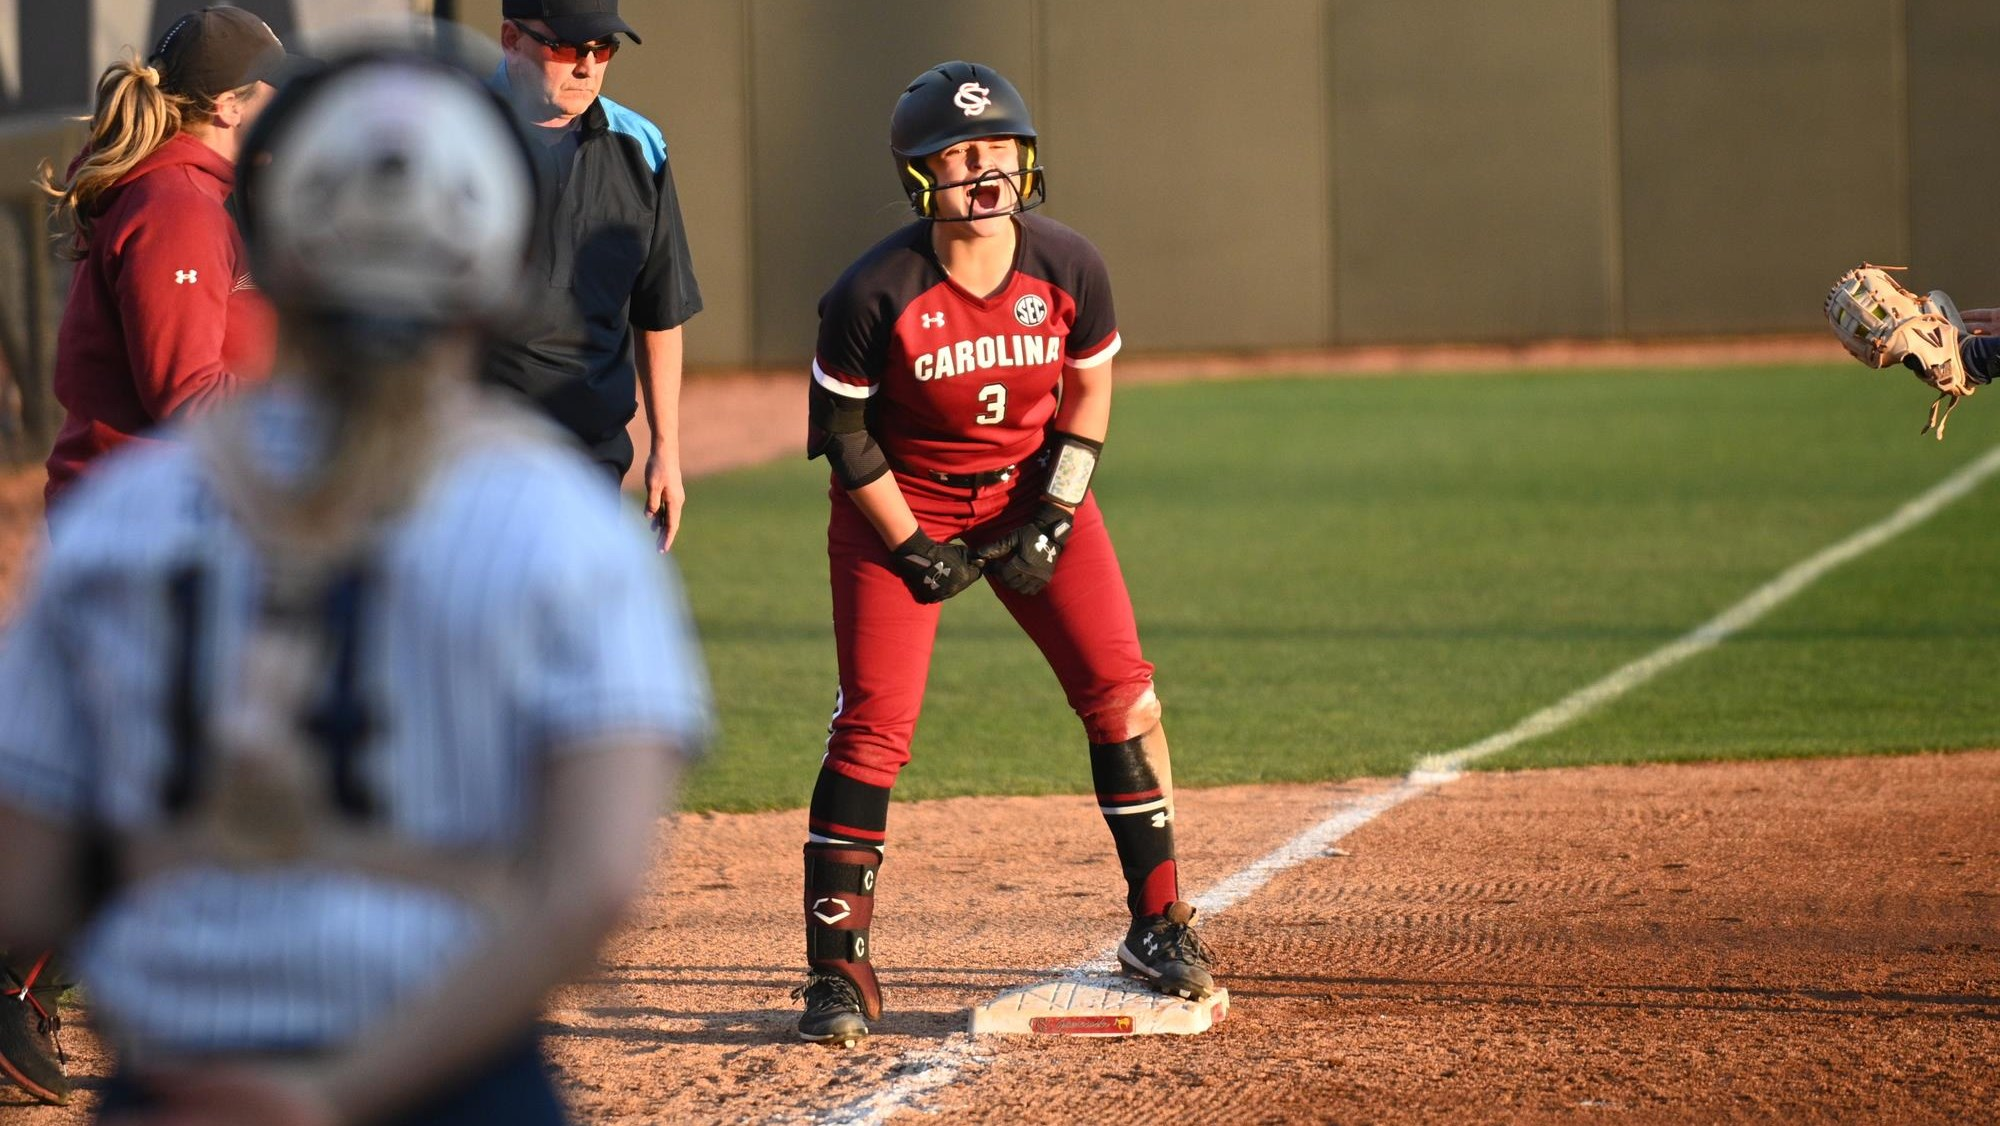 Softball Scores 26 Runs in Pair of Victories